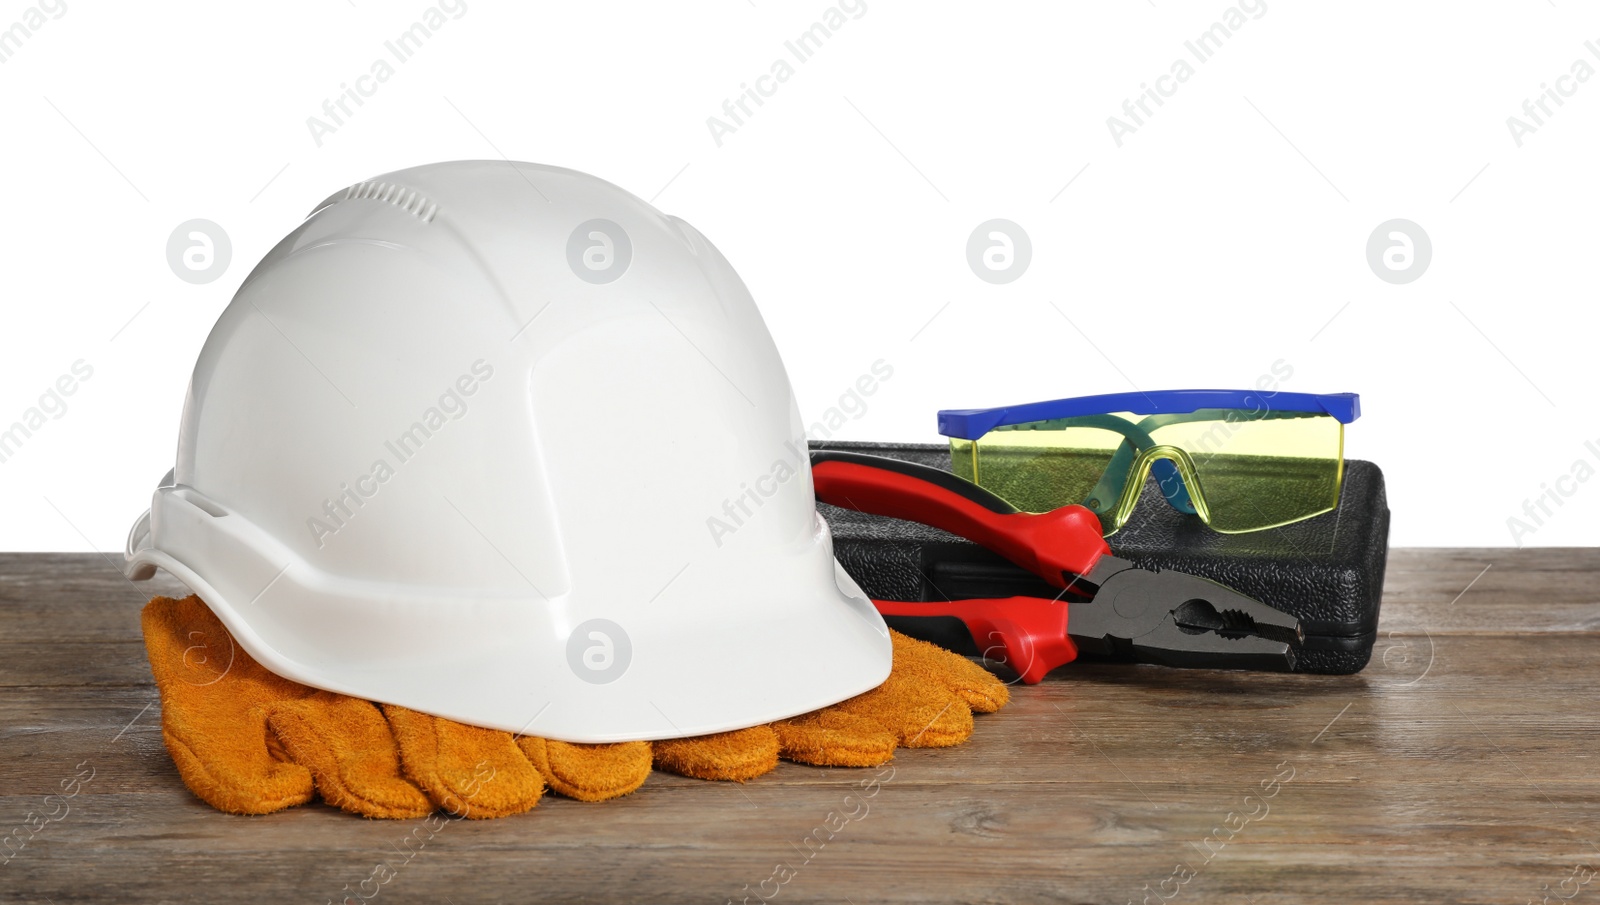 Photo of Personal protective equipment and tool on wooden surface against white background